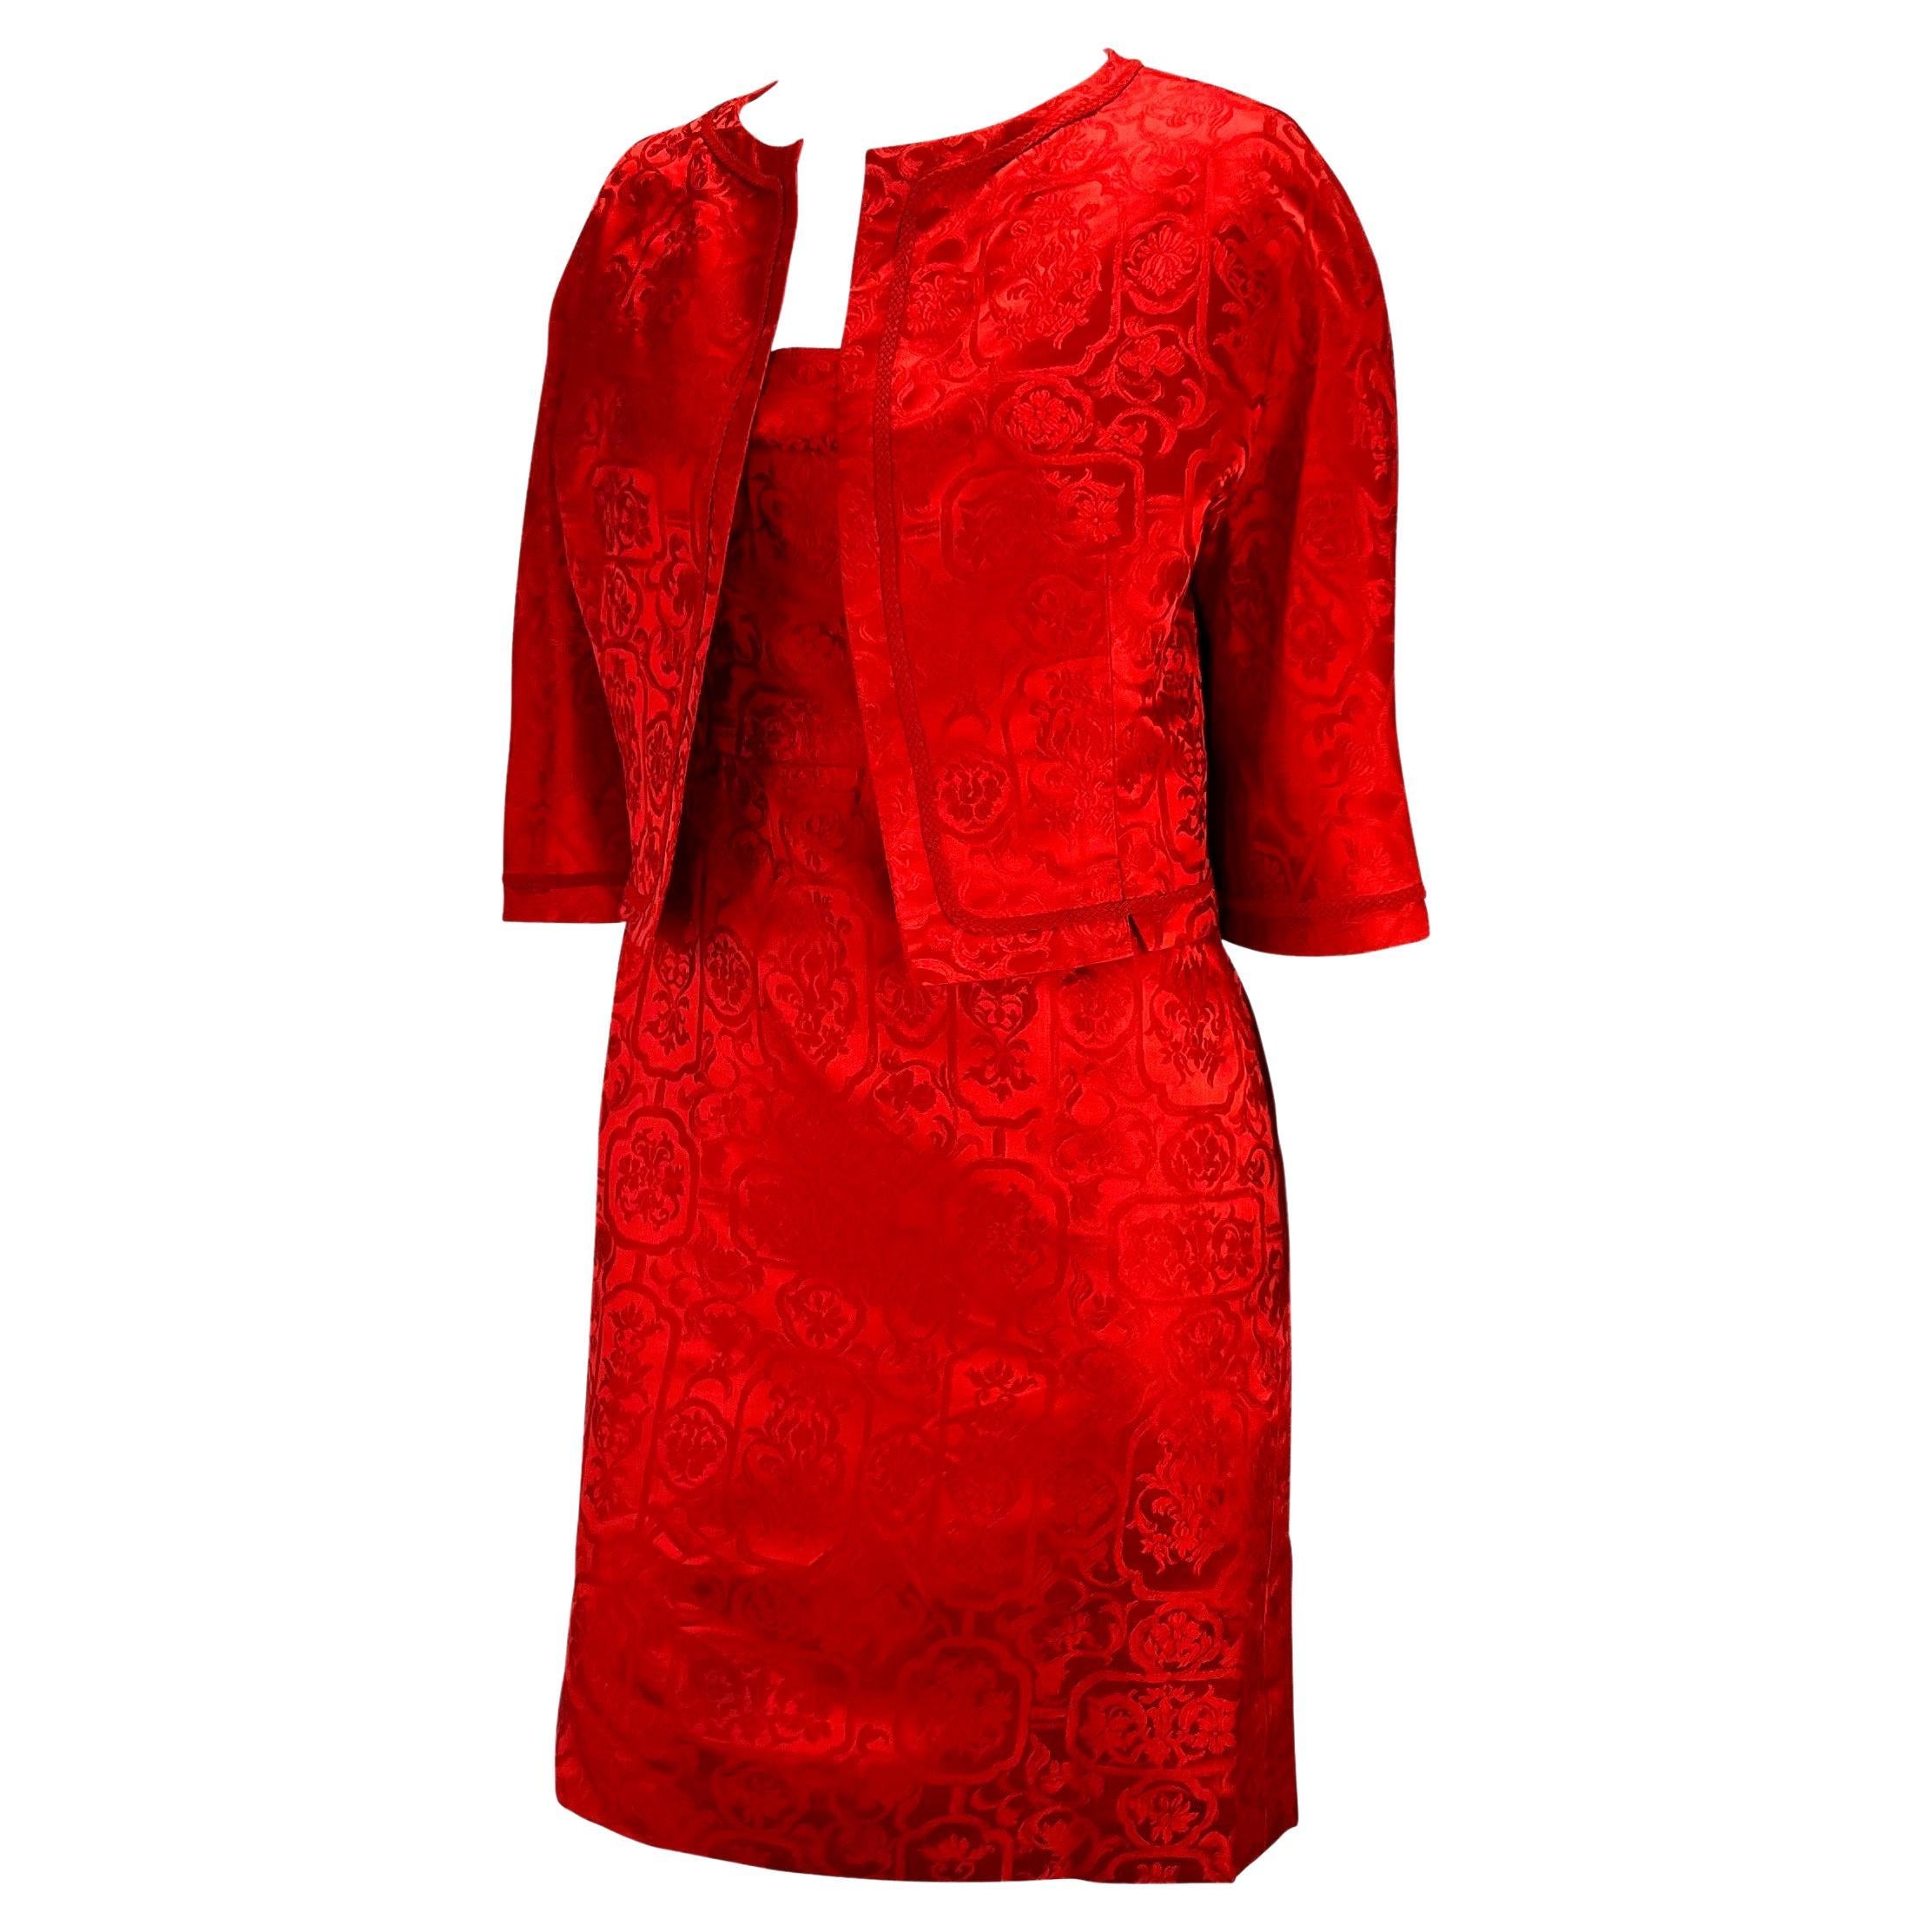 TheRealList presents: a stunning red satin Christian Dior Boutique dress set, designed by Christian Dior. From the 1950s, this beautiful set is constructed of bright red satin with a floral brocade pattern. The a-line dress features a square